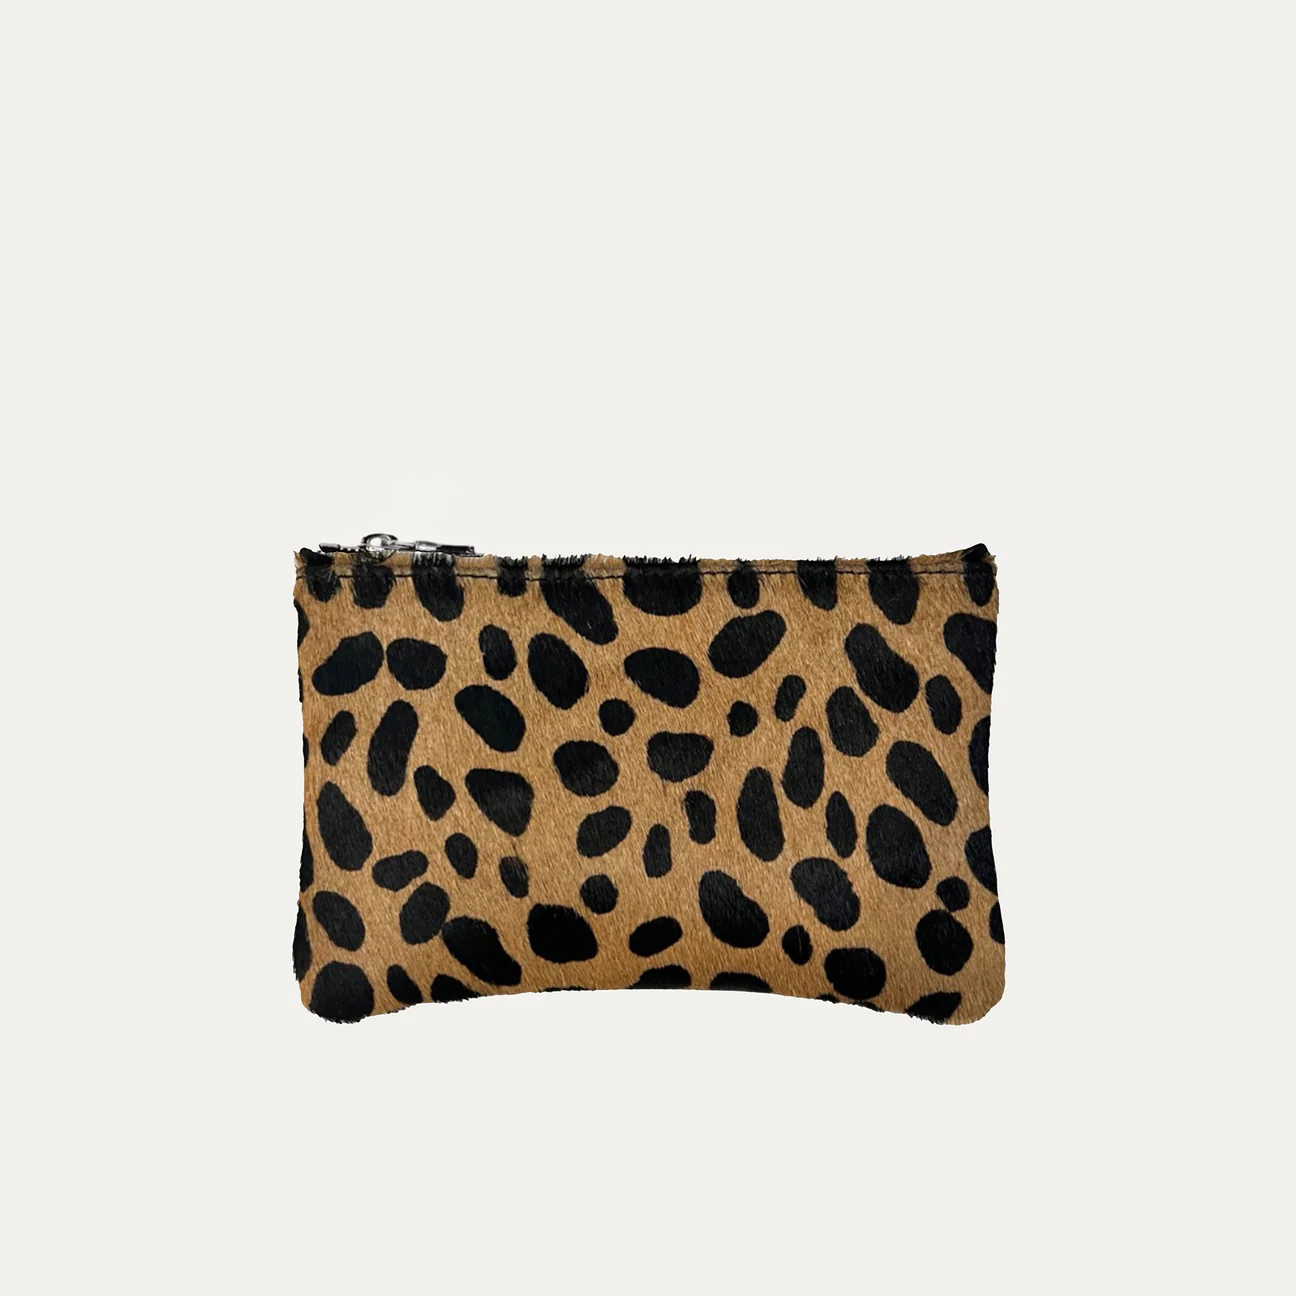 Pauly Pouch Organizer | Black and Brown Cheetah + Silver Hardware